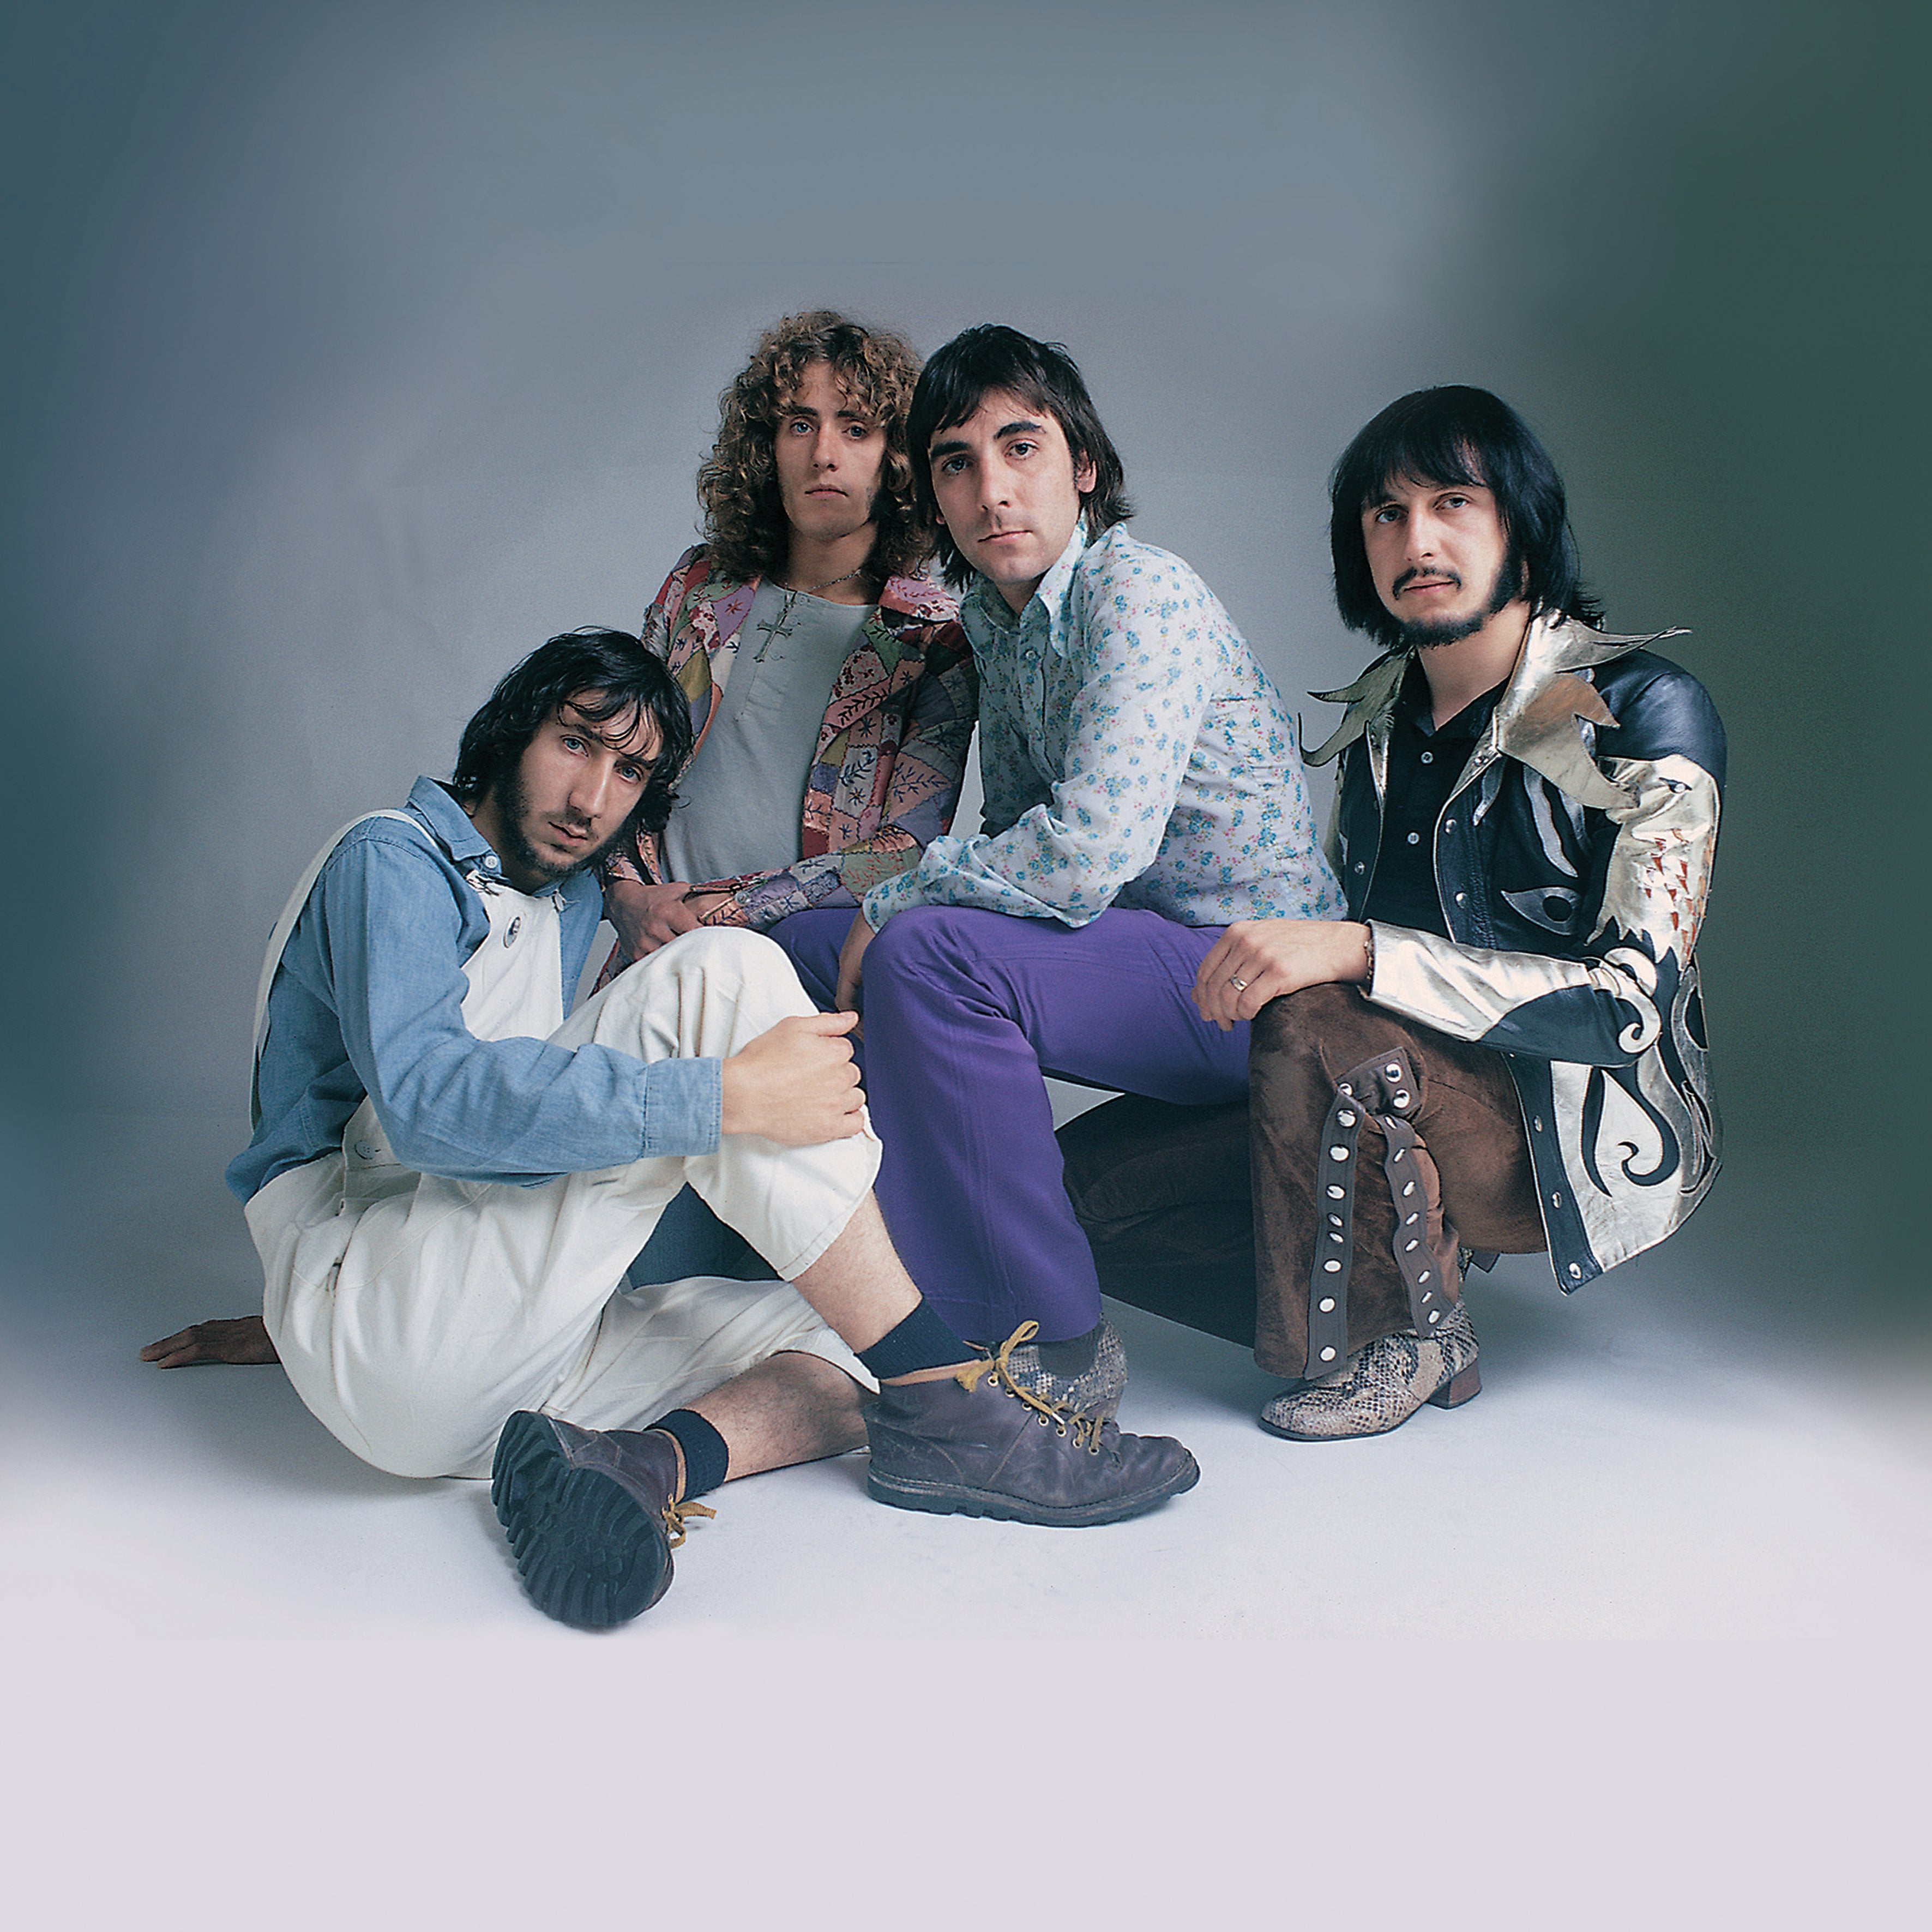 The Who from left to right: Pete Townshend, Roger Daltrey, Keith Moon and John Entwistle